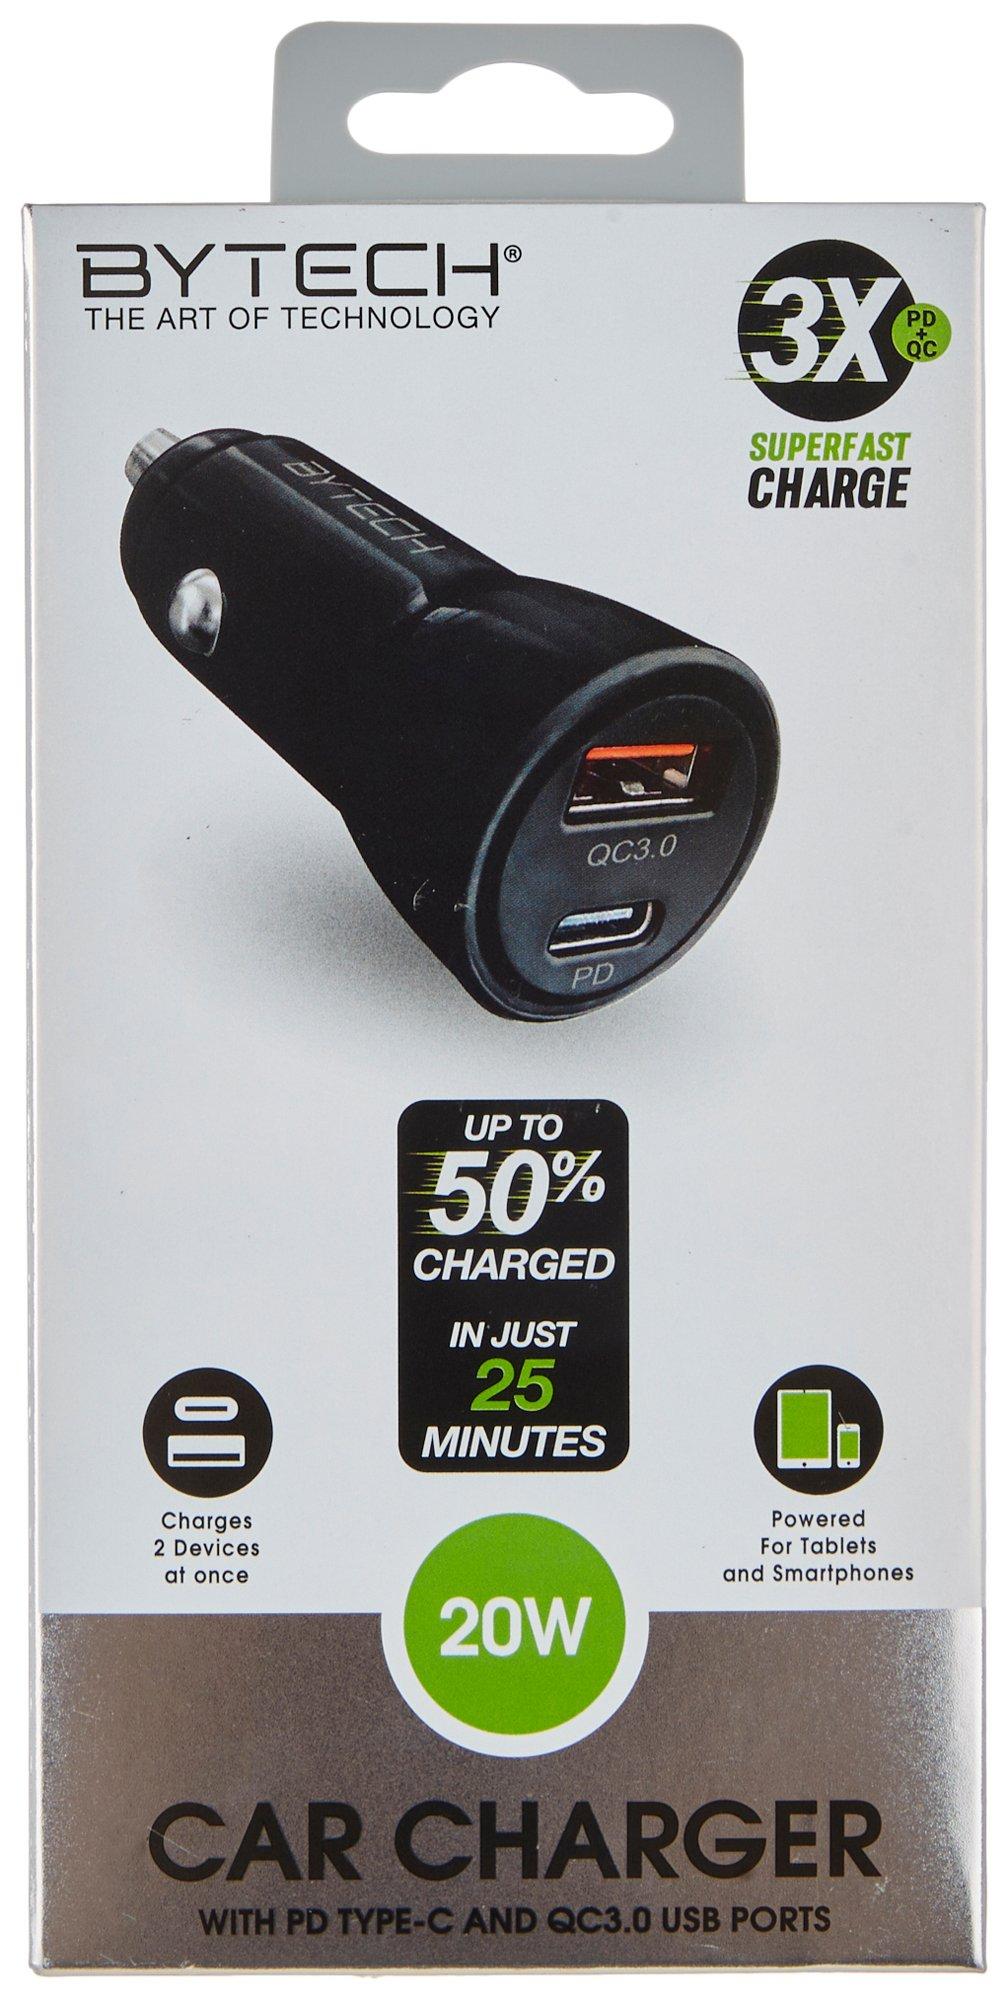 Bytech Plug-In Car Charger